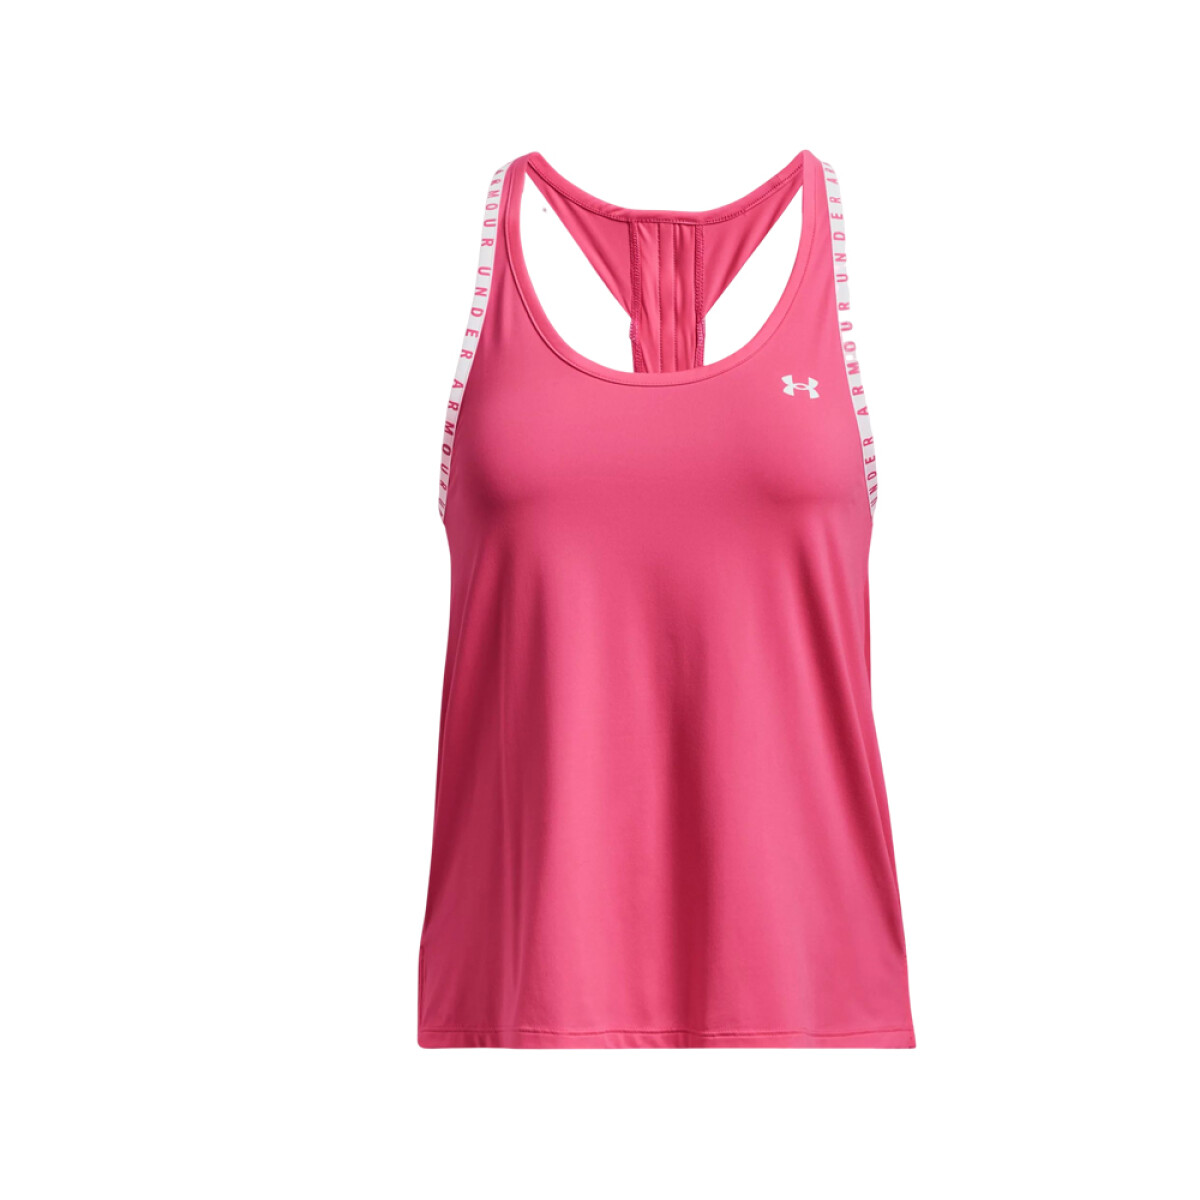 MUSCULOSA UNDER ARMOUR KNOCKOUT TANK - Pink 